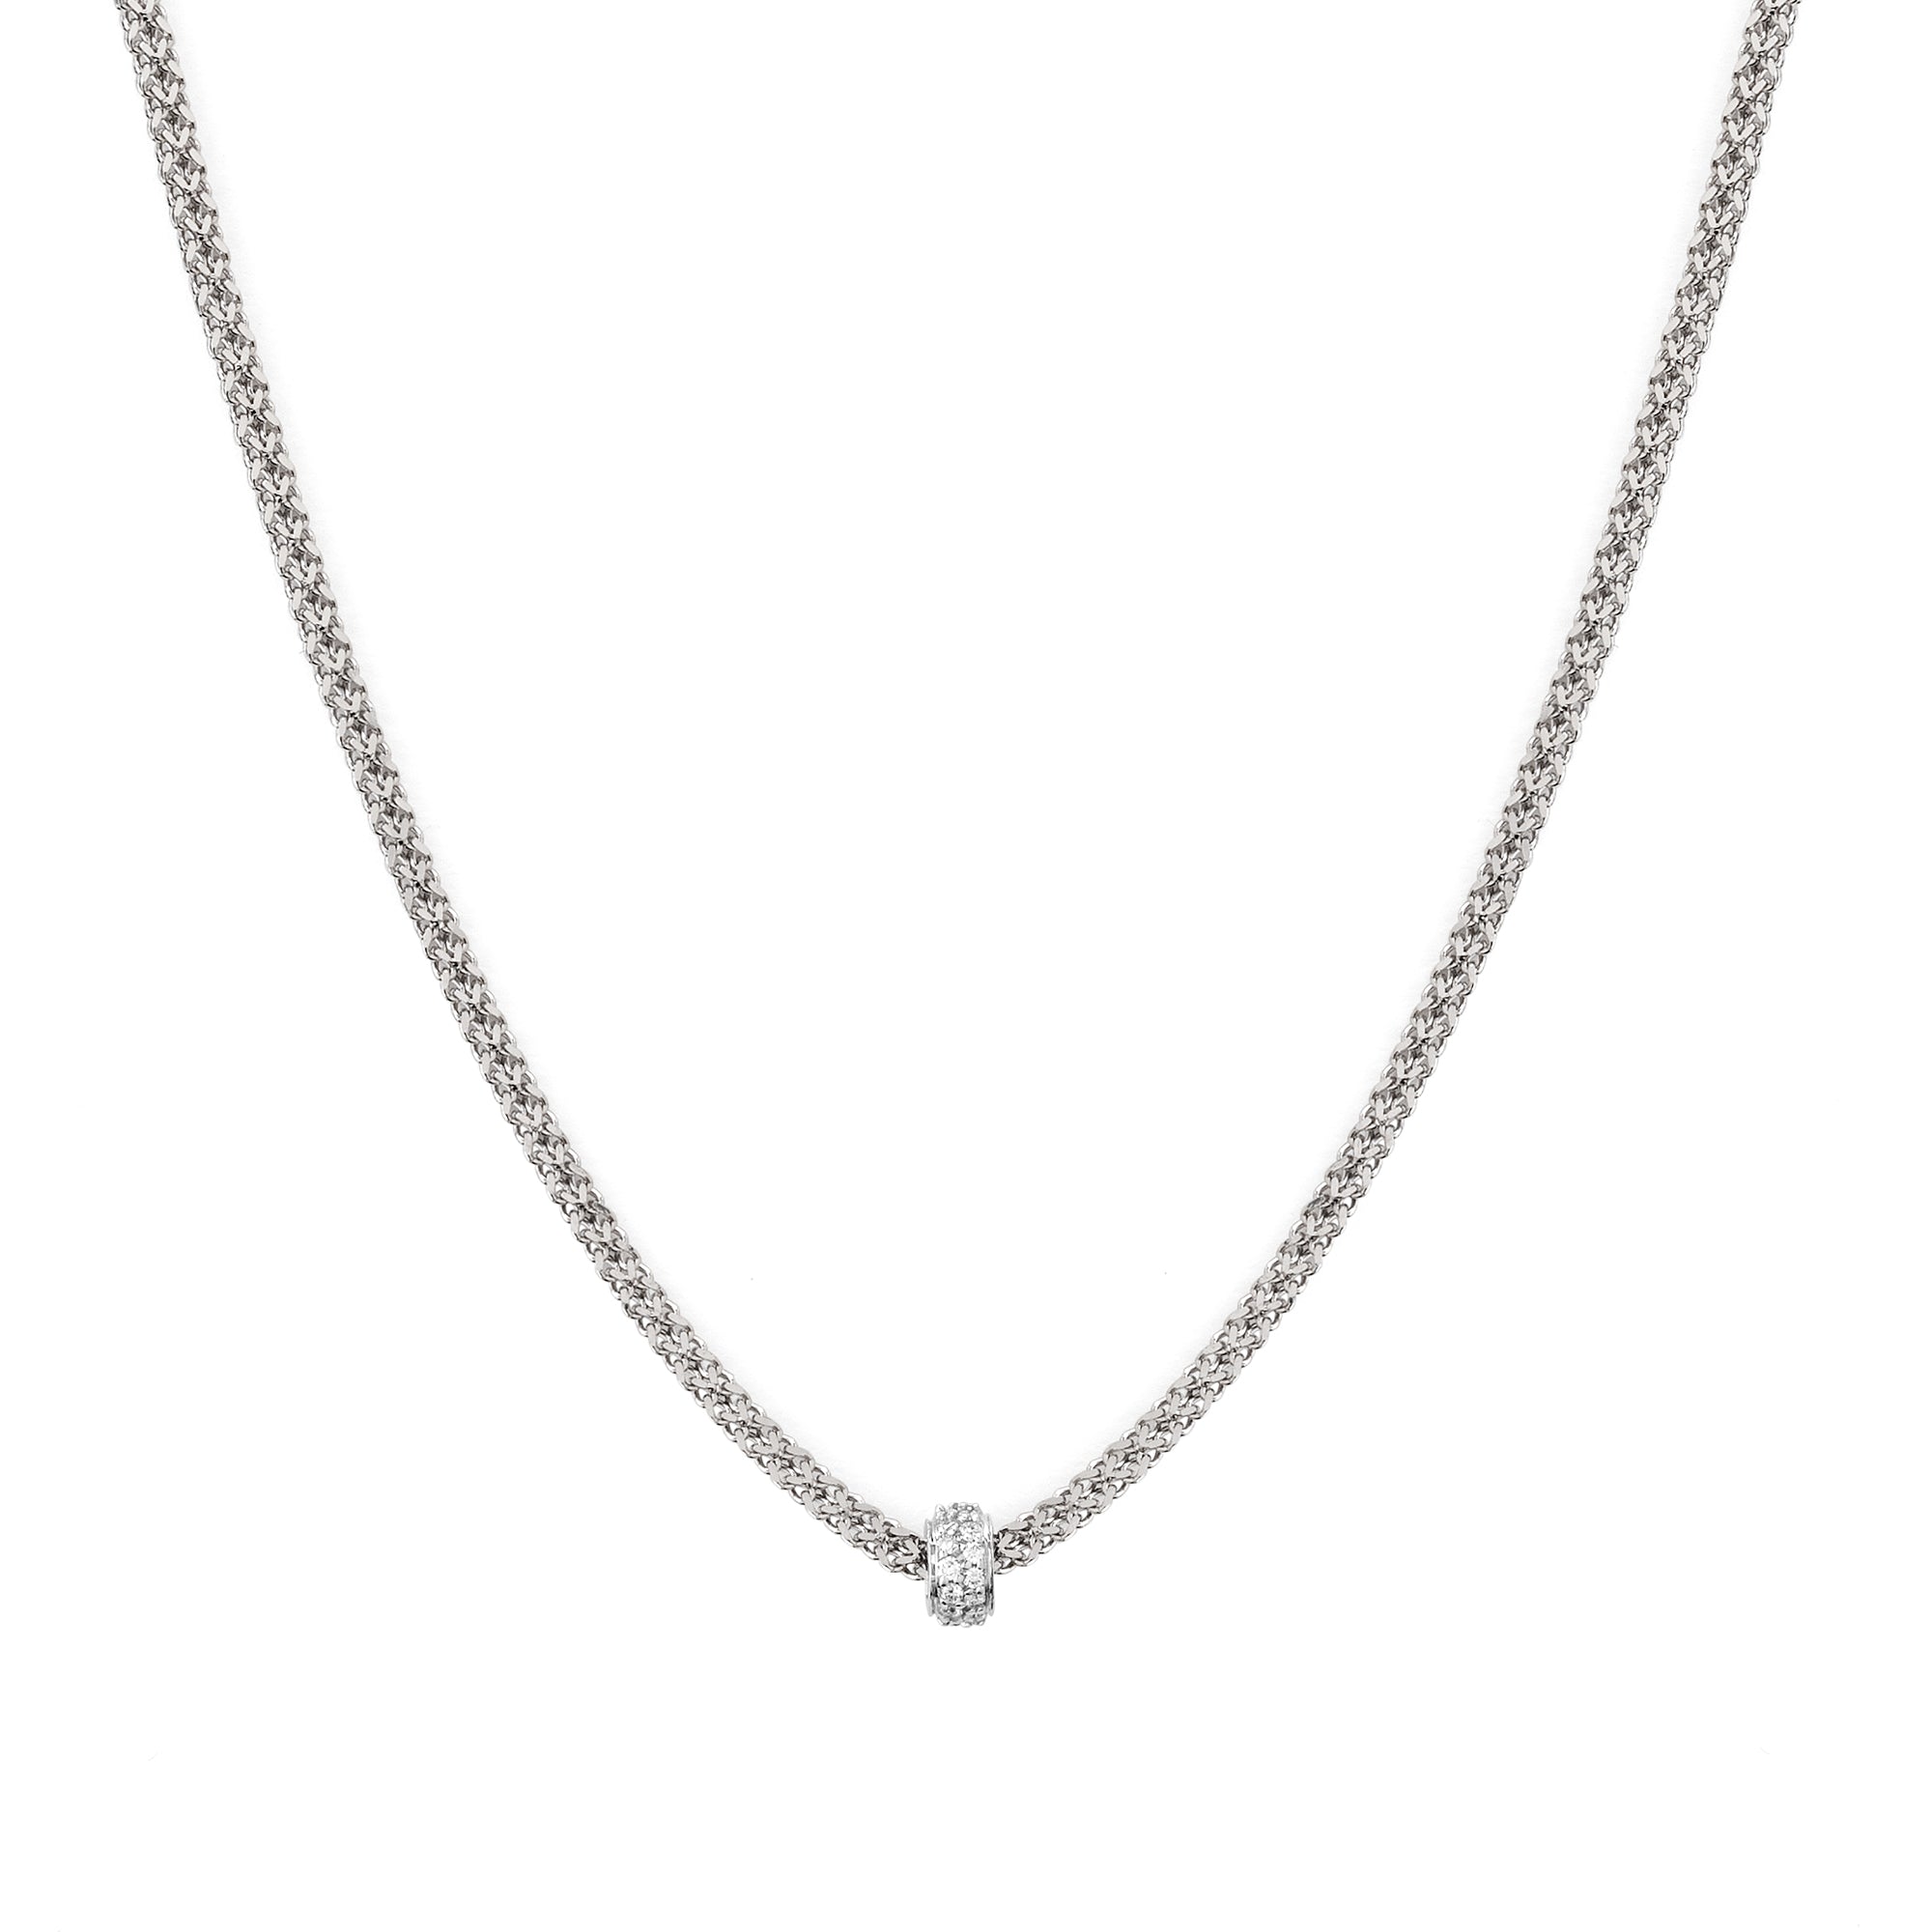 Heritage necklace in white gold and diamonds